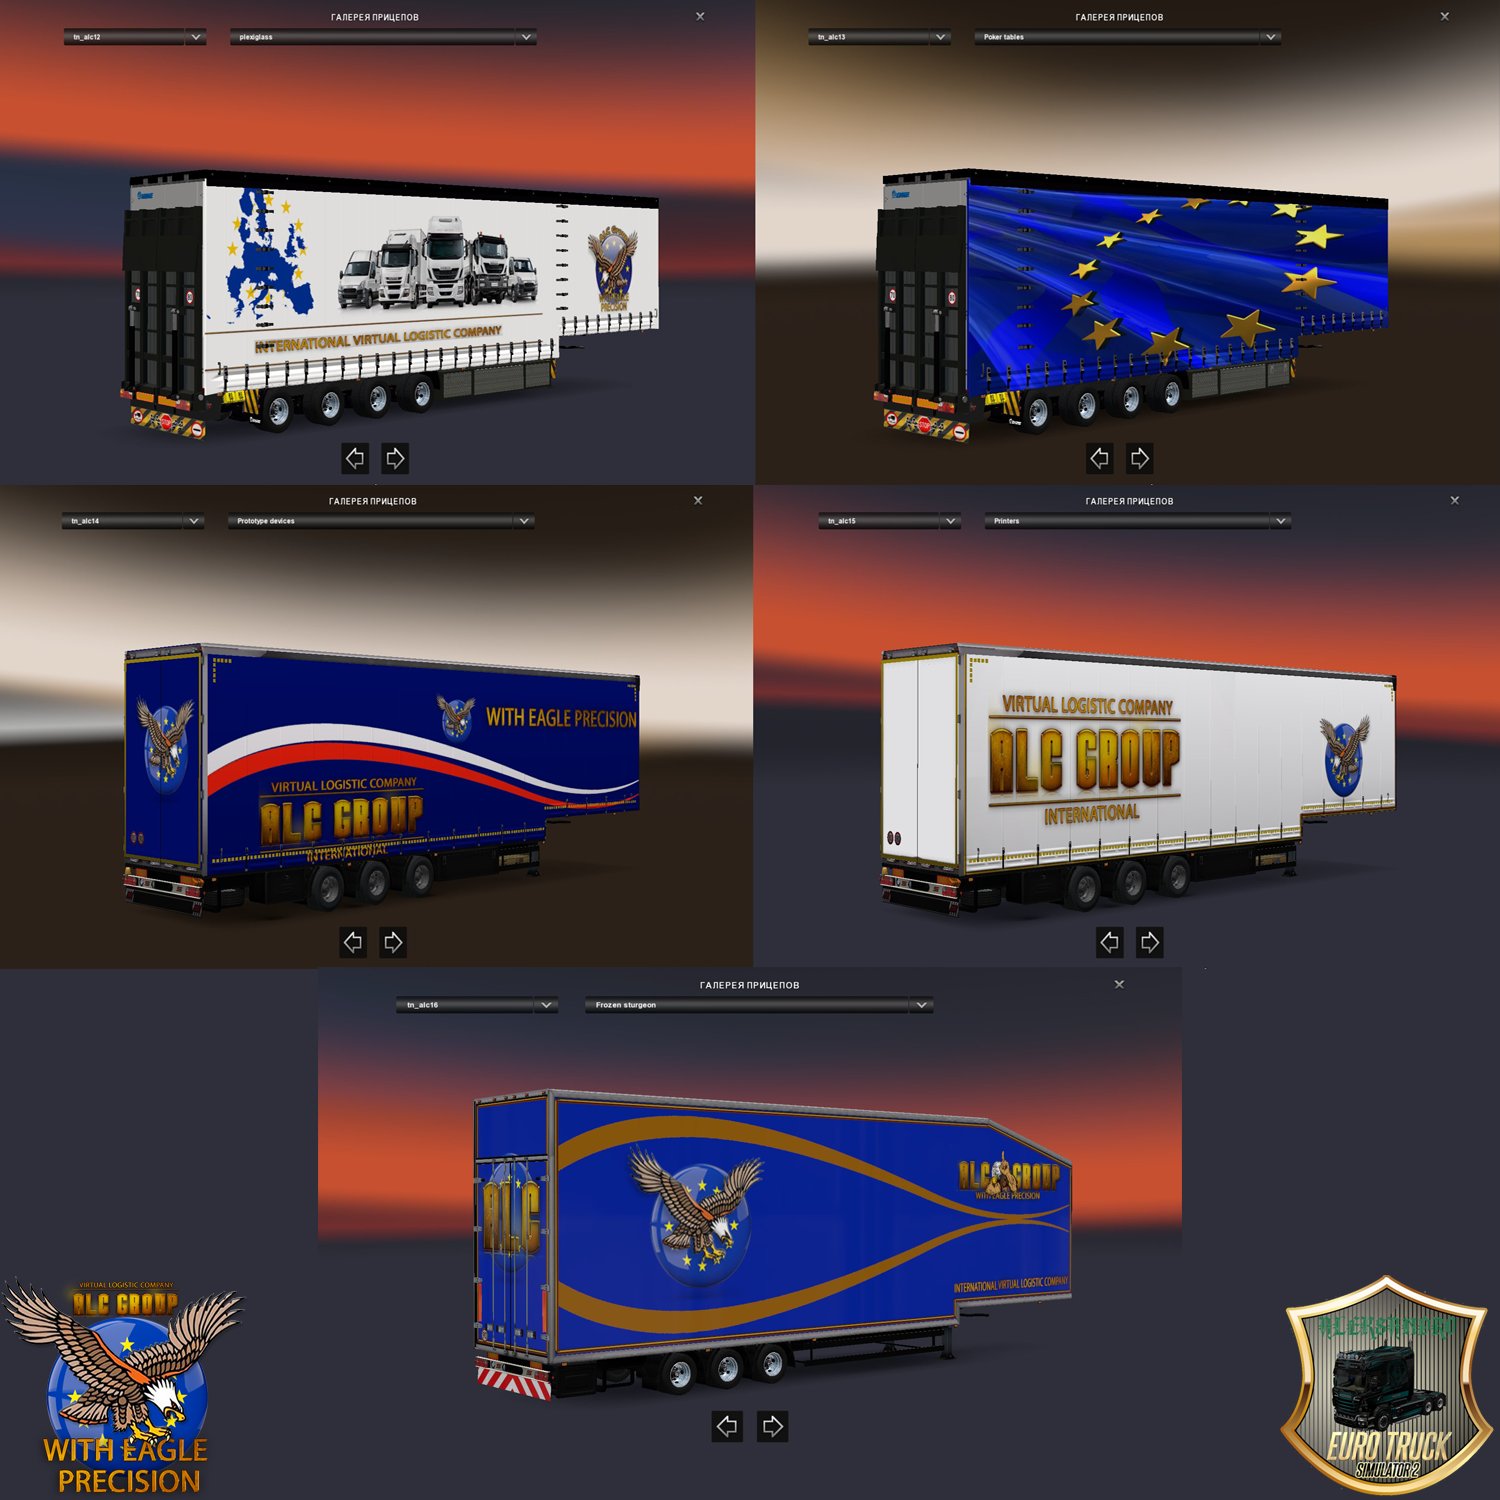 "ALC Group" Trailer Pack